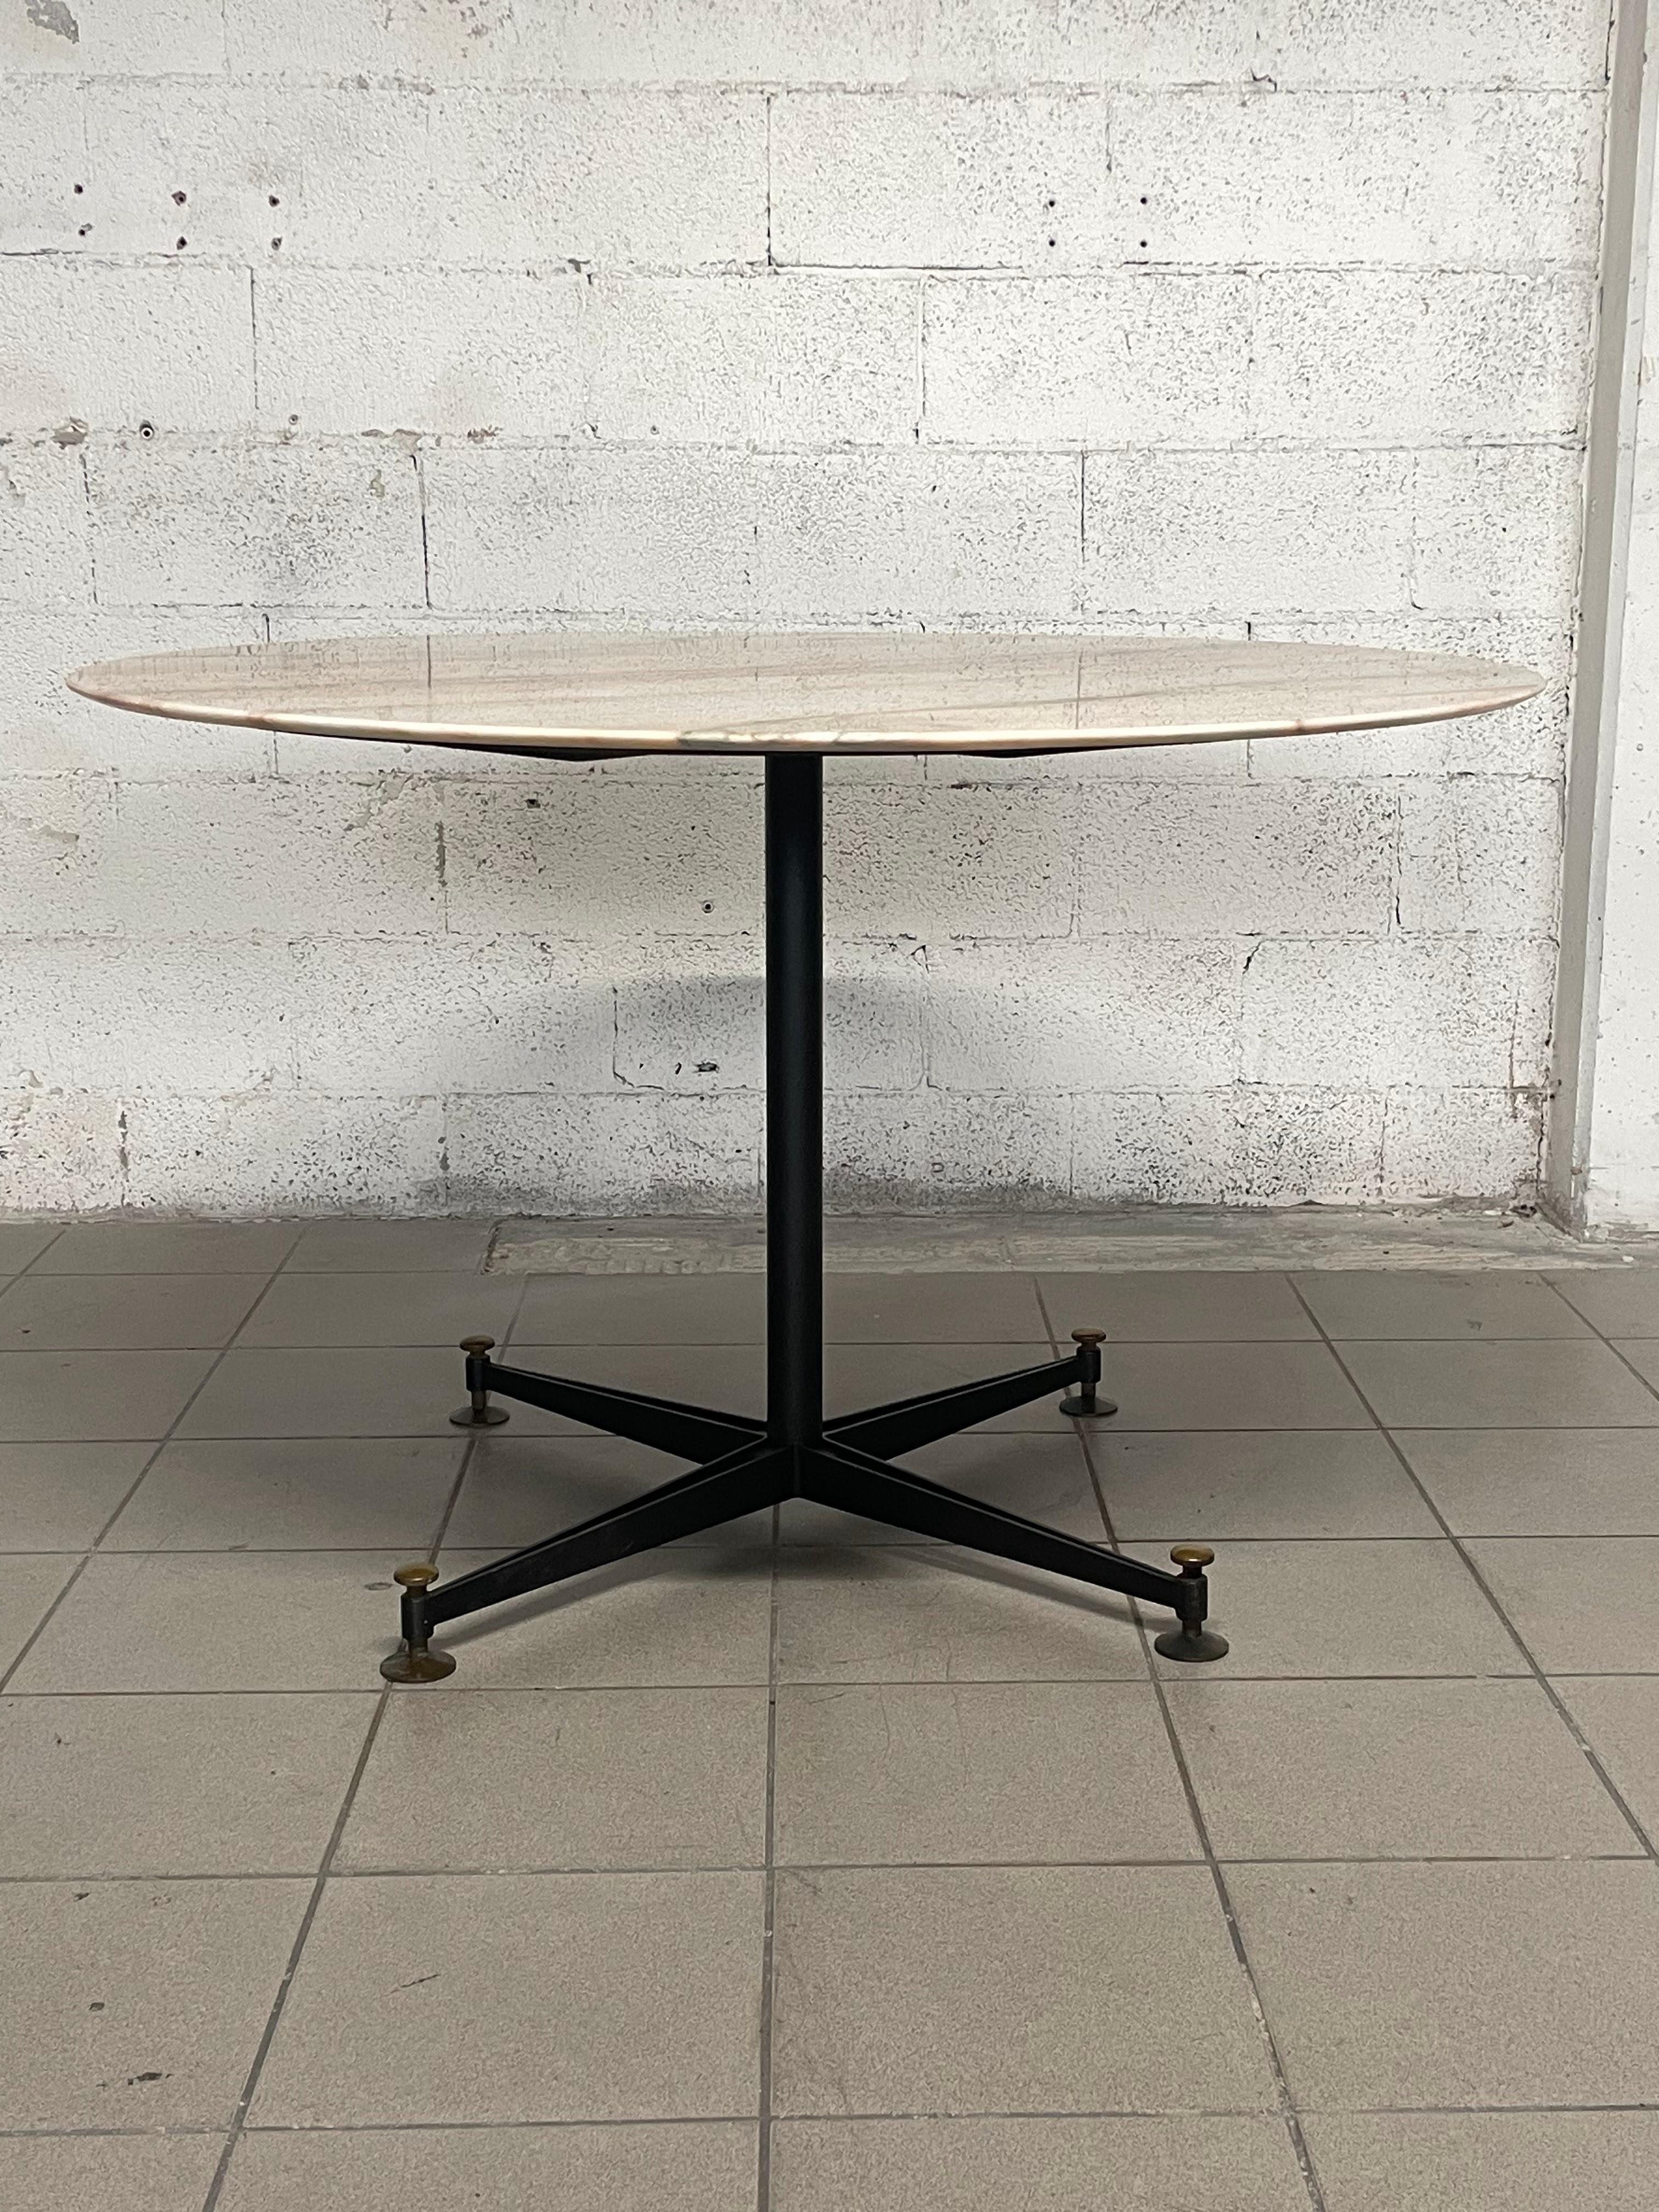 1950s round table of Italian manufacture.
Black lacquered iron leg with adjustable brass screw feet.
Marble top with pink veins.